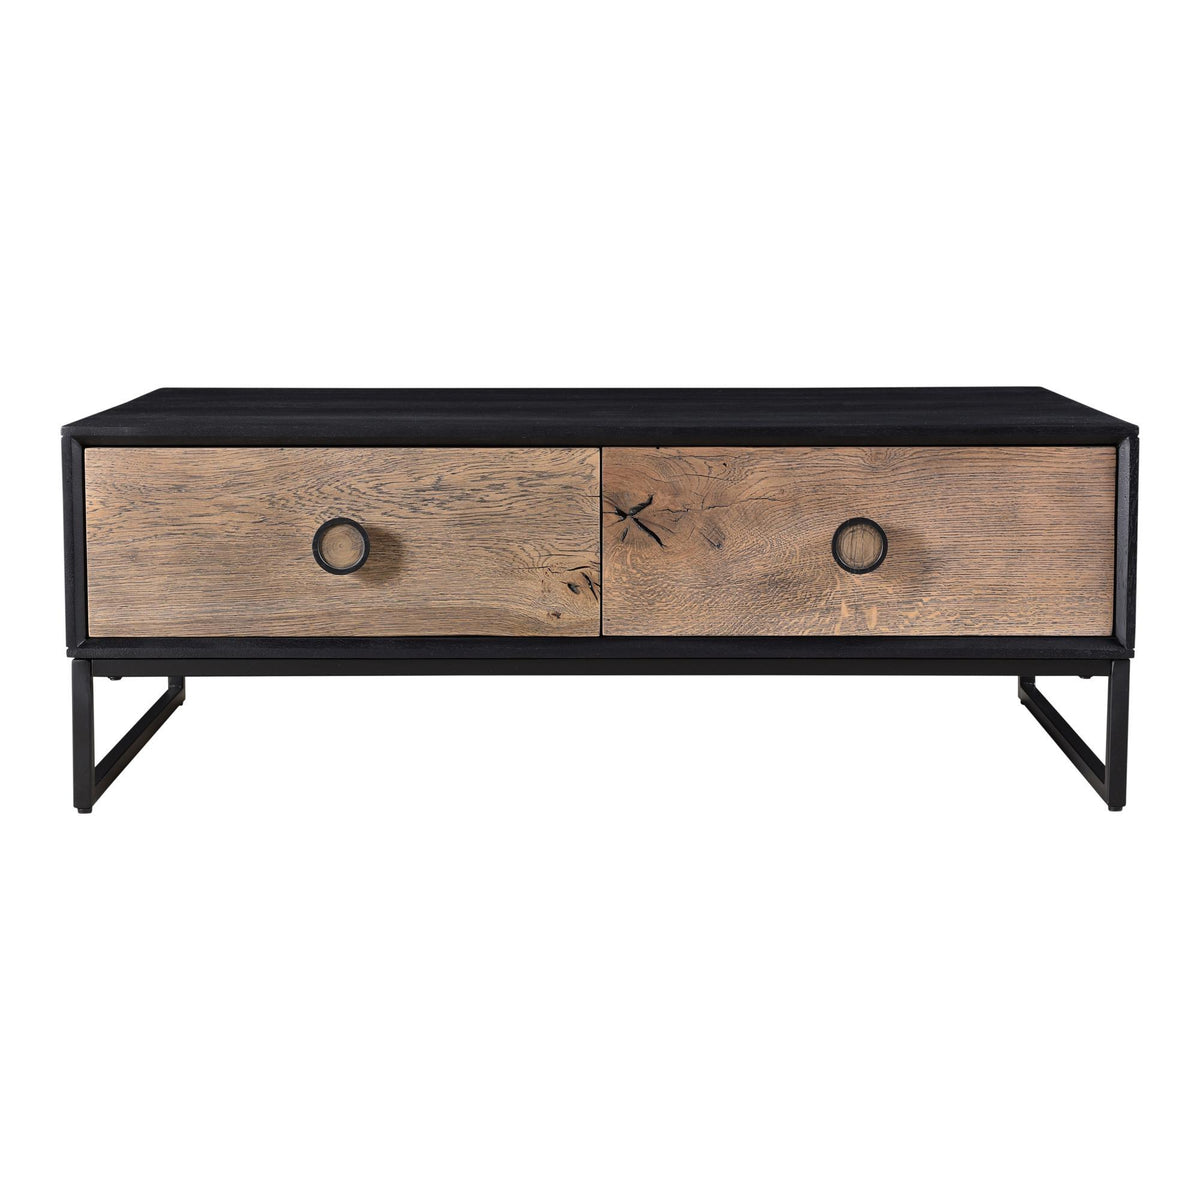 Moe's Home Collection Heath Coffee Table - RP-1002-24